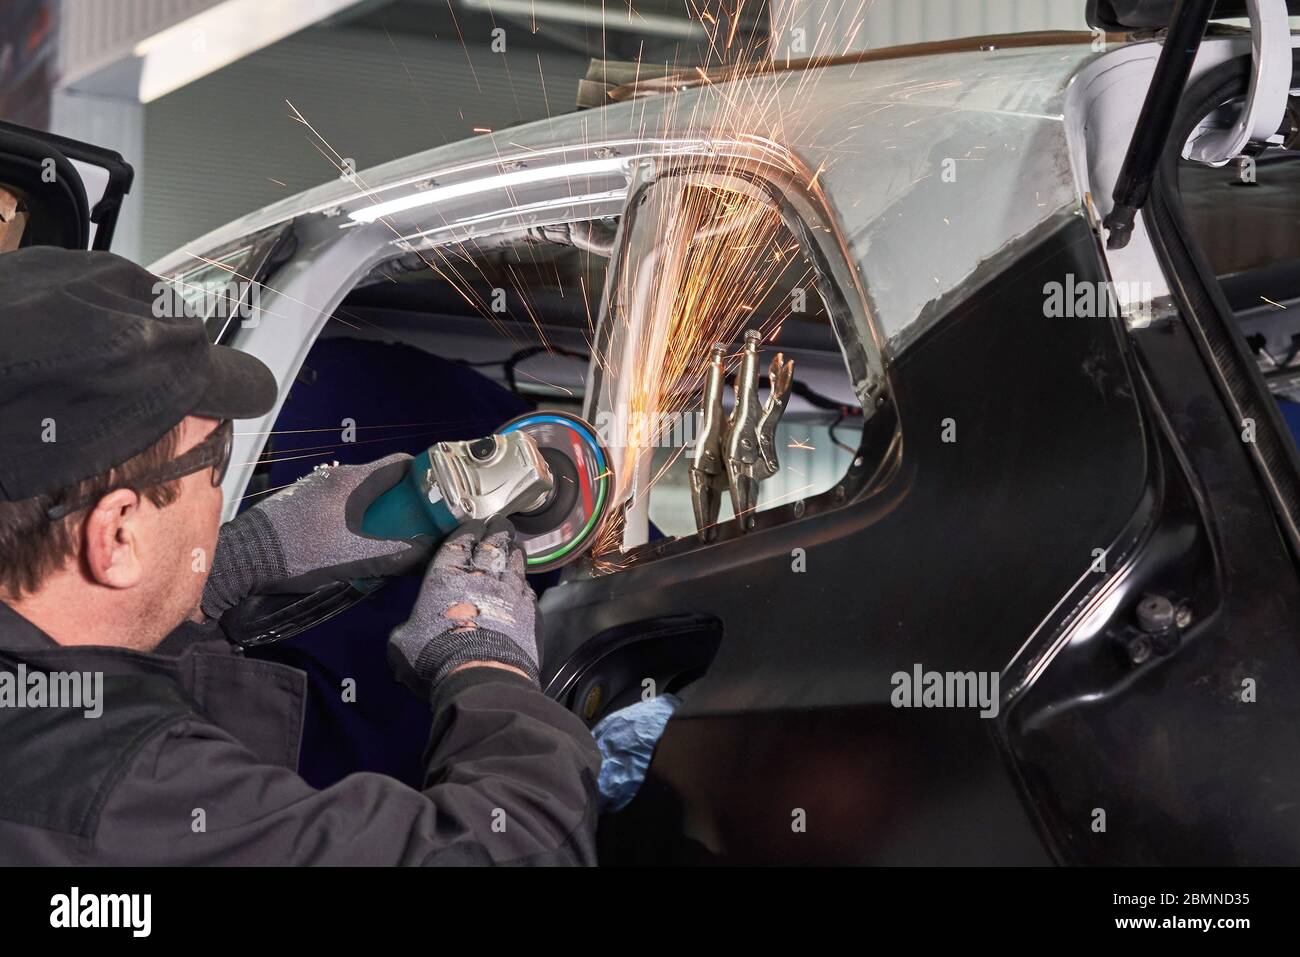 Repair service worker fix damaged car. Working with angle grinder to fix metal body. Stock Photo